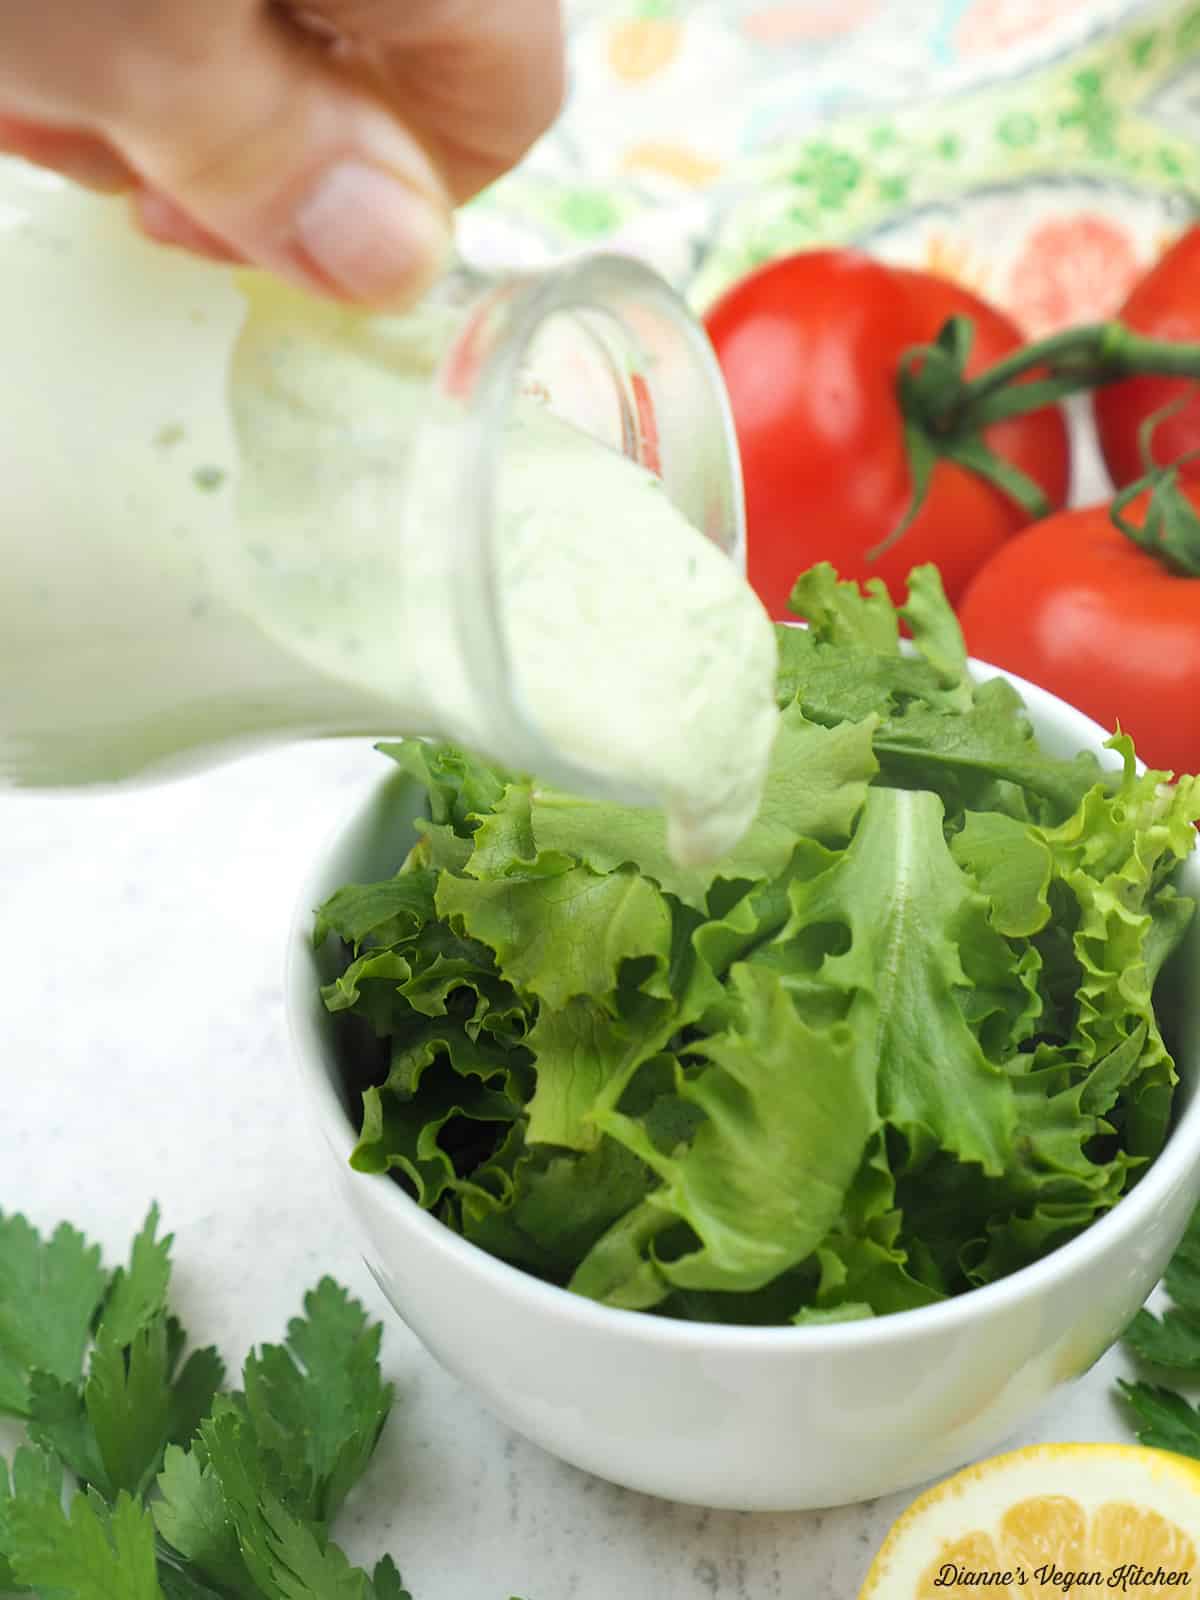 pouring dressing on a salad